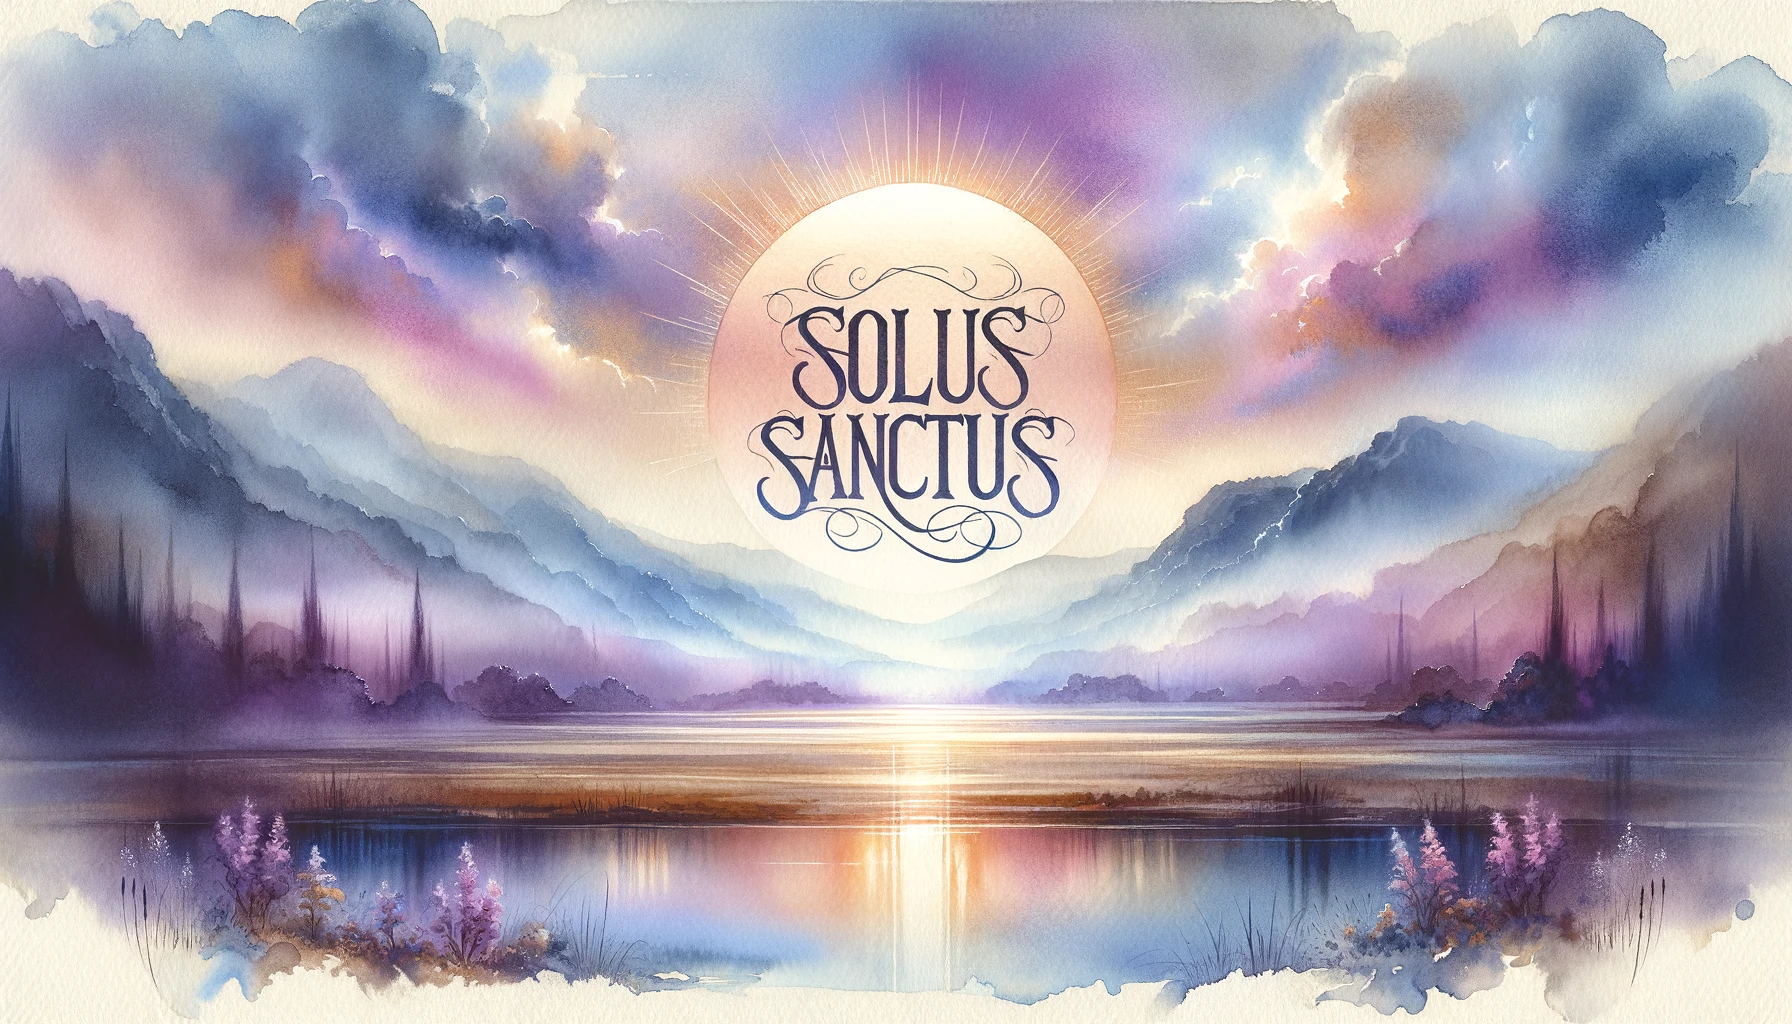 Dawn's mist veils rolling hills near a serene water body reflecting the sky. "Solus Sanctus" graces the center in elegant script.